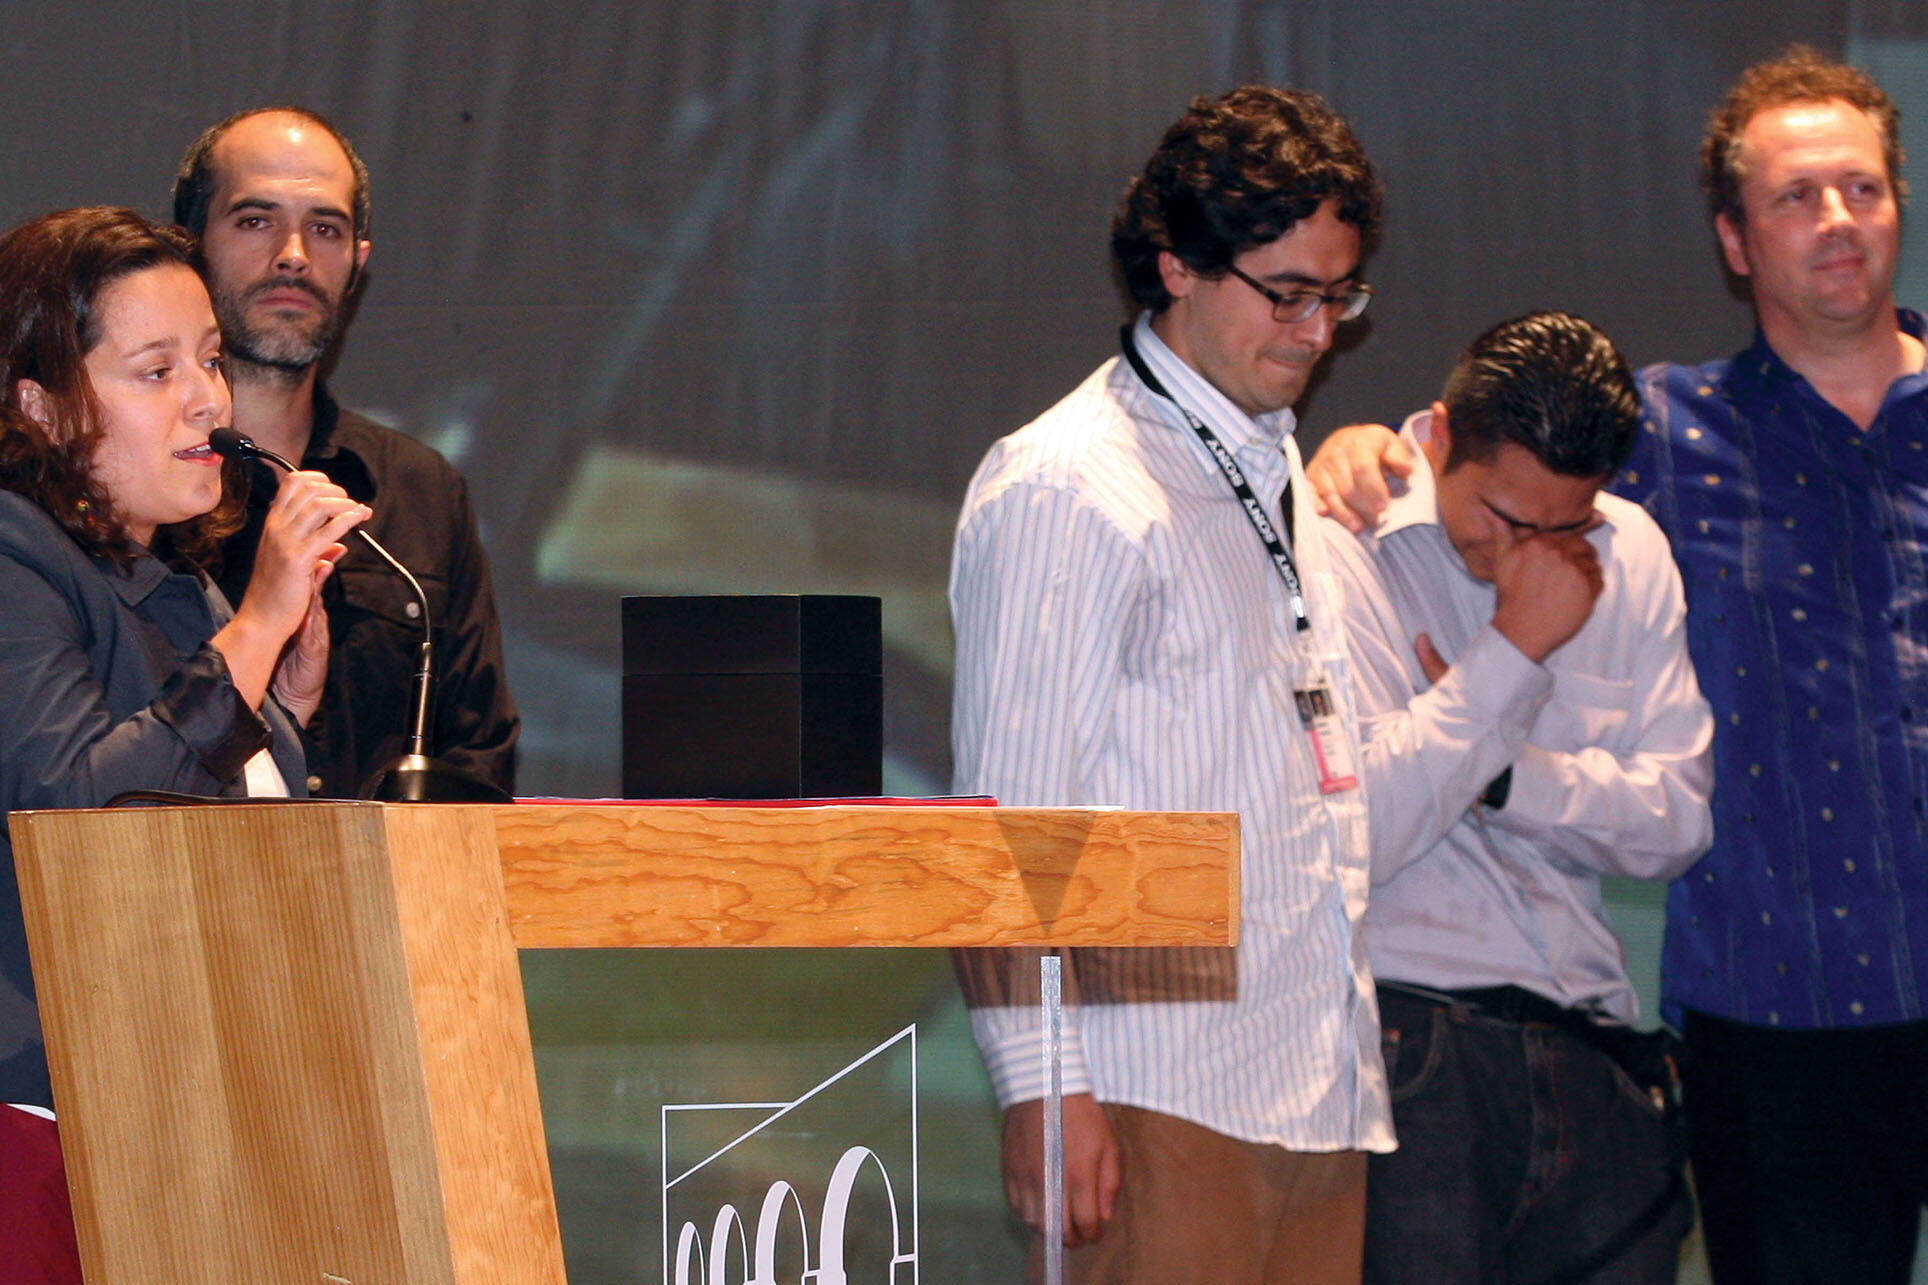 Layda Negrete speaks at the Morelia Film Festival, while Roberto and co-director Geoffrey Smith comfort a weeping Toño. (Photo by Paulo Vidales/Imagen Latente.)